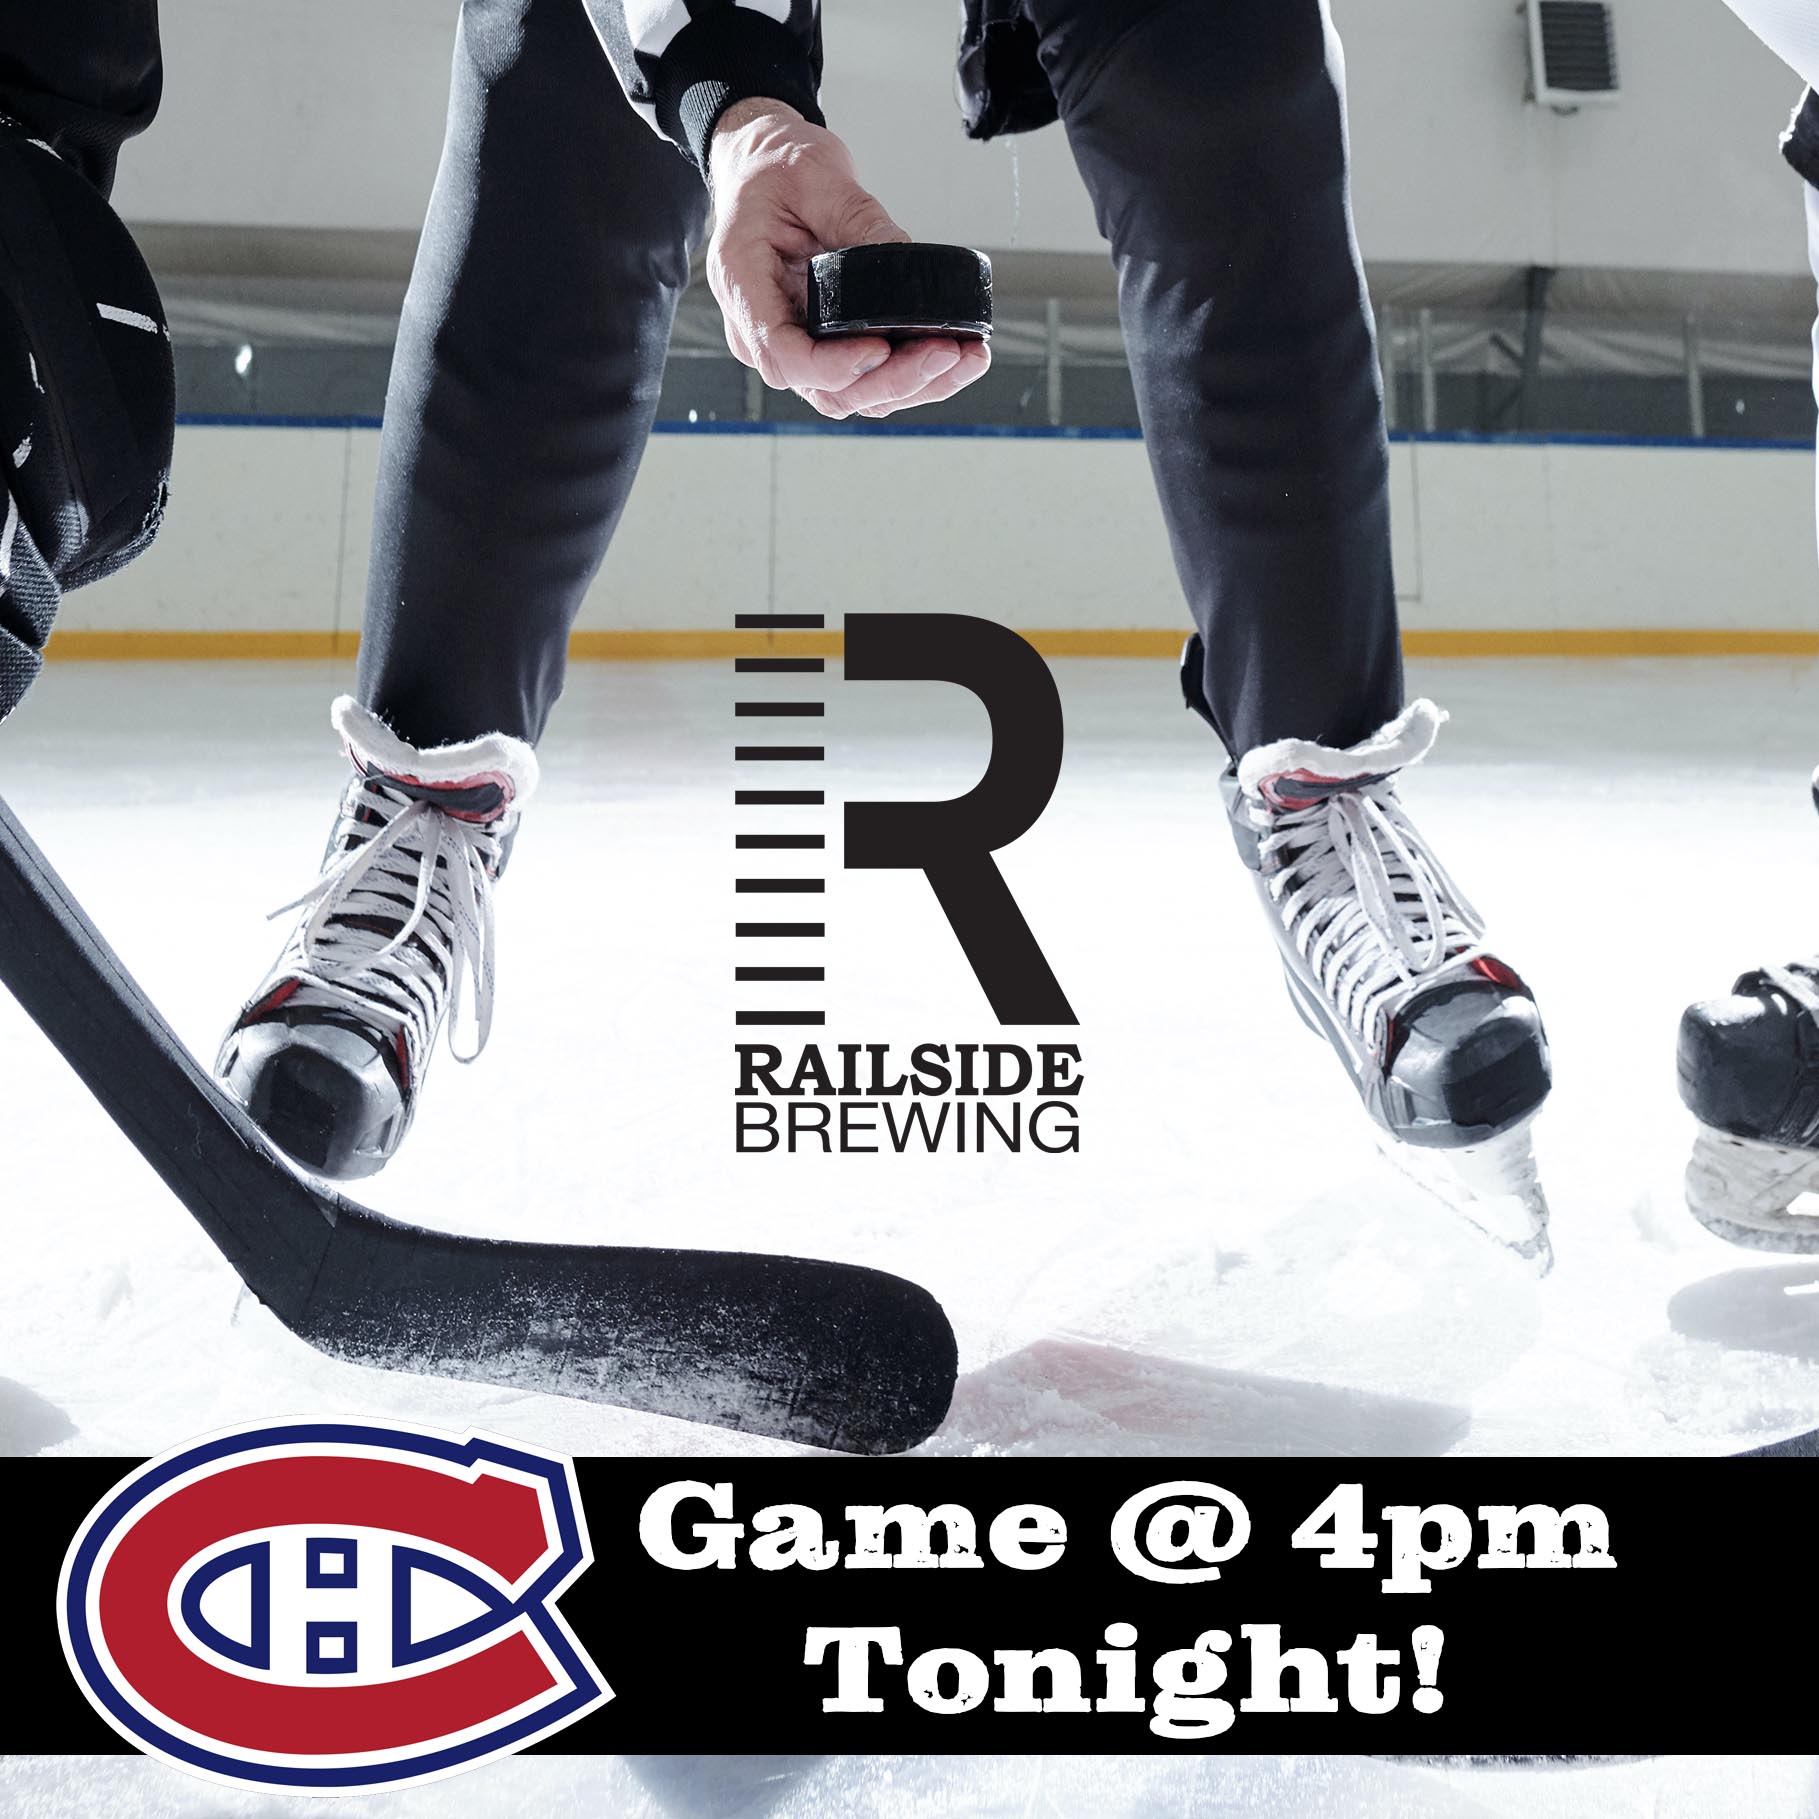 habs game at 4pm